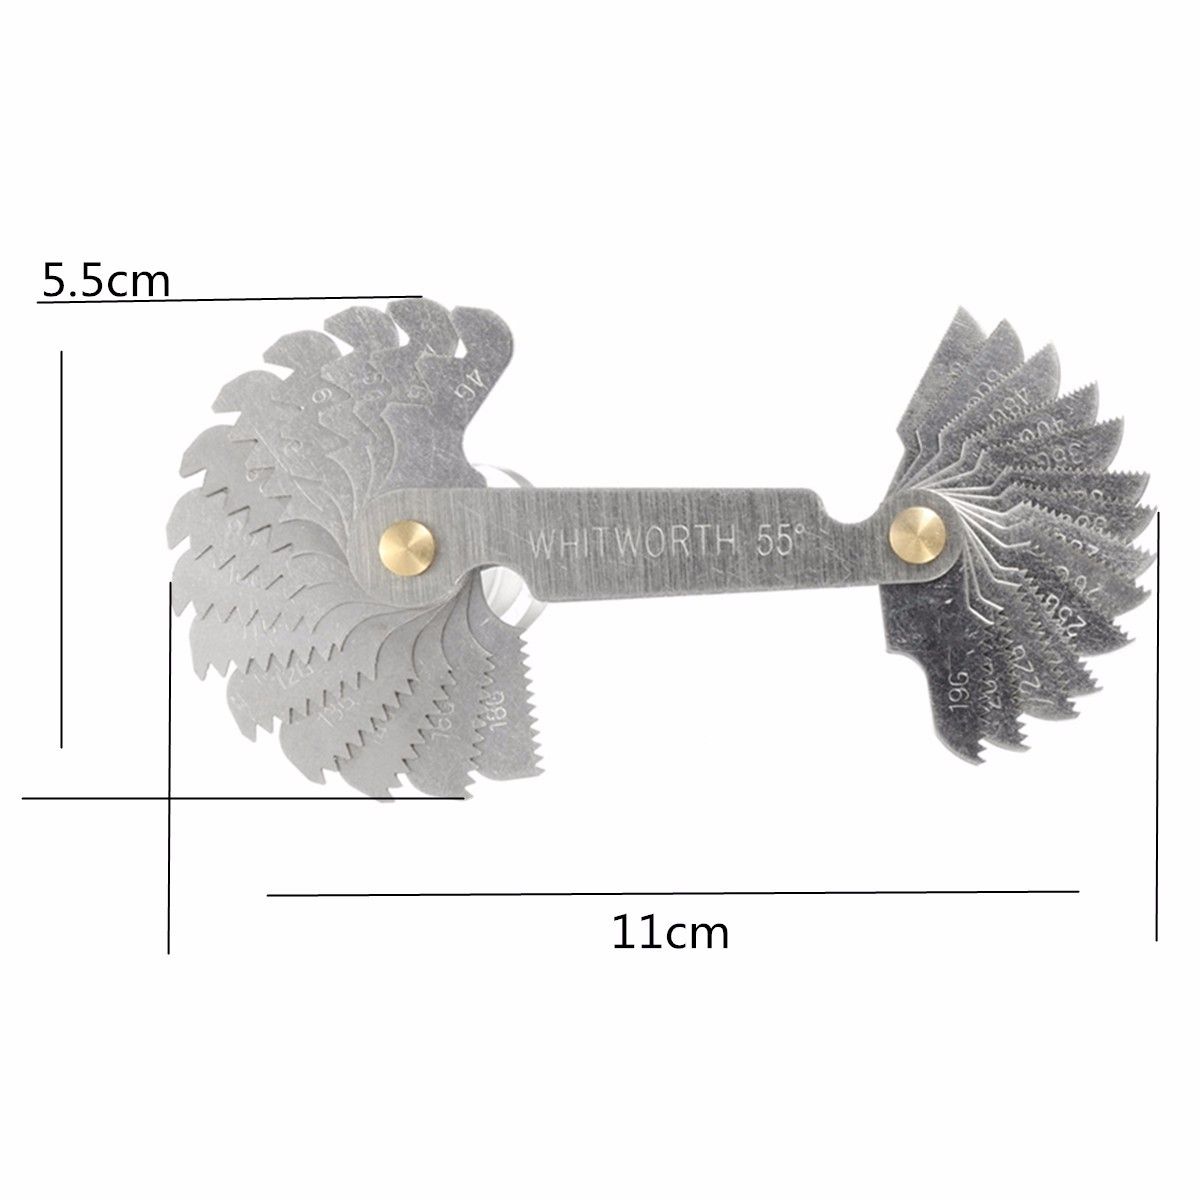 Metric-Whitworth-5560-Degree-Thread-Screw-Pitch-Gauge-With-3x-Centre-Gages-1092555